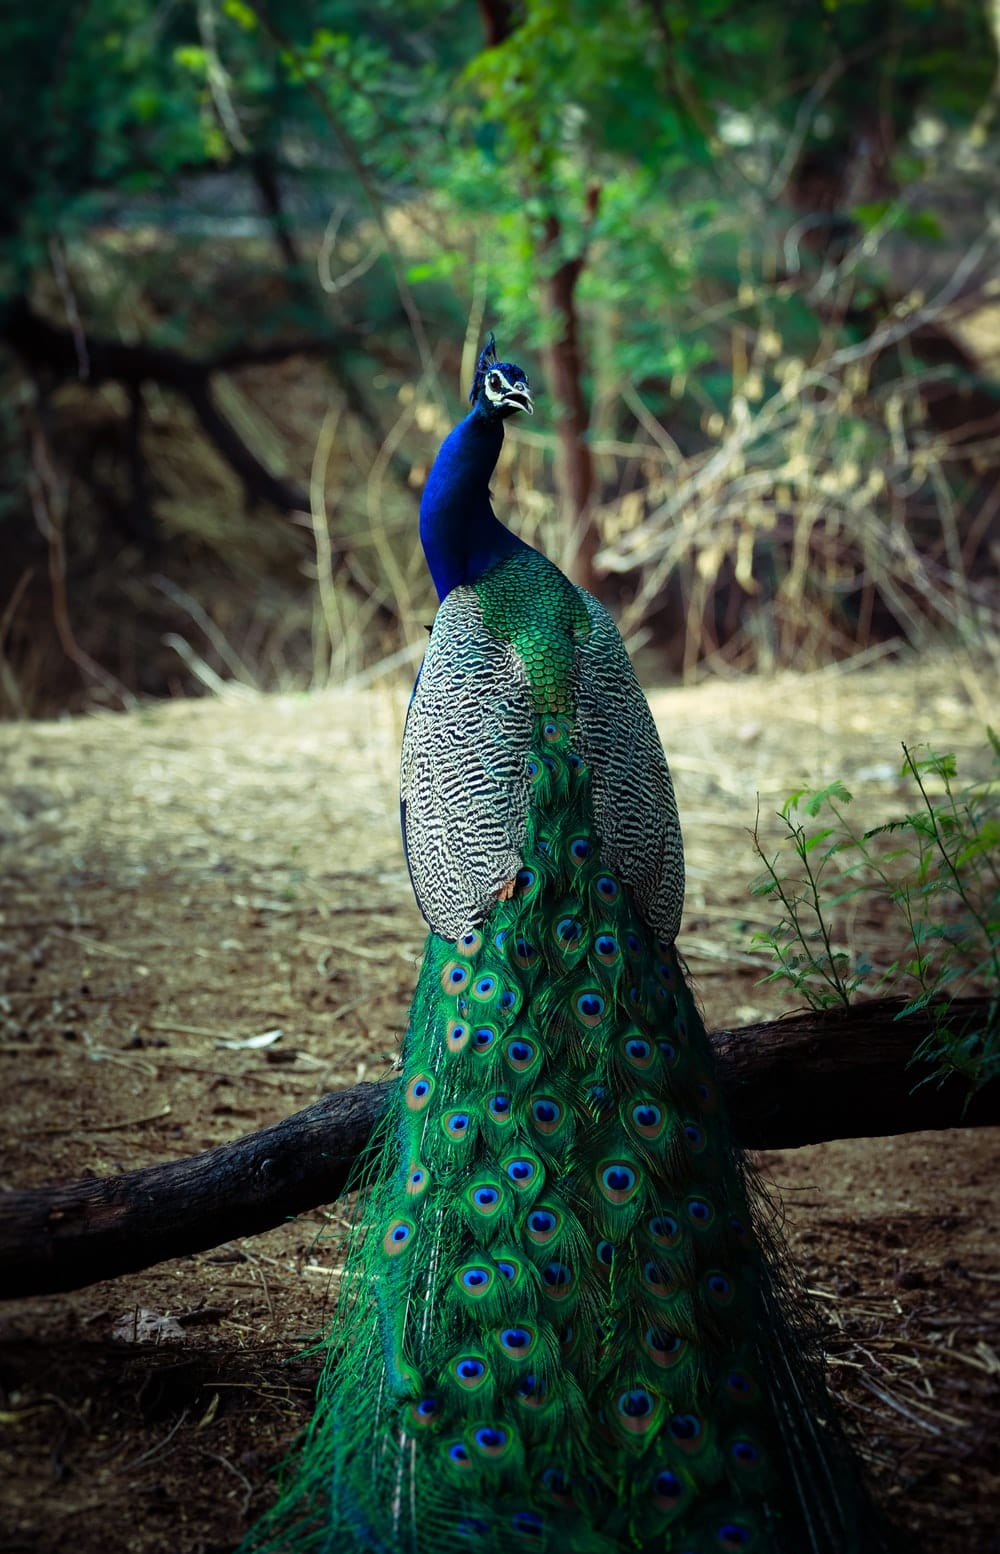 Cross Stitch | Peacock - Male Green And Blue Peacock - Cross Stitched